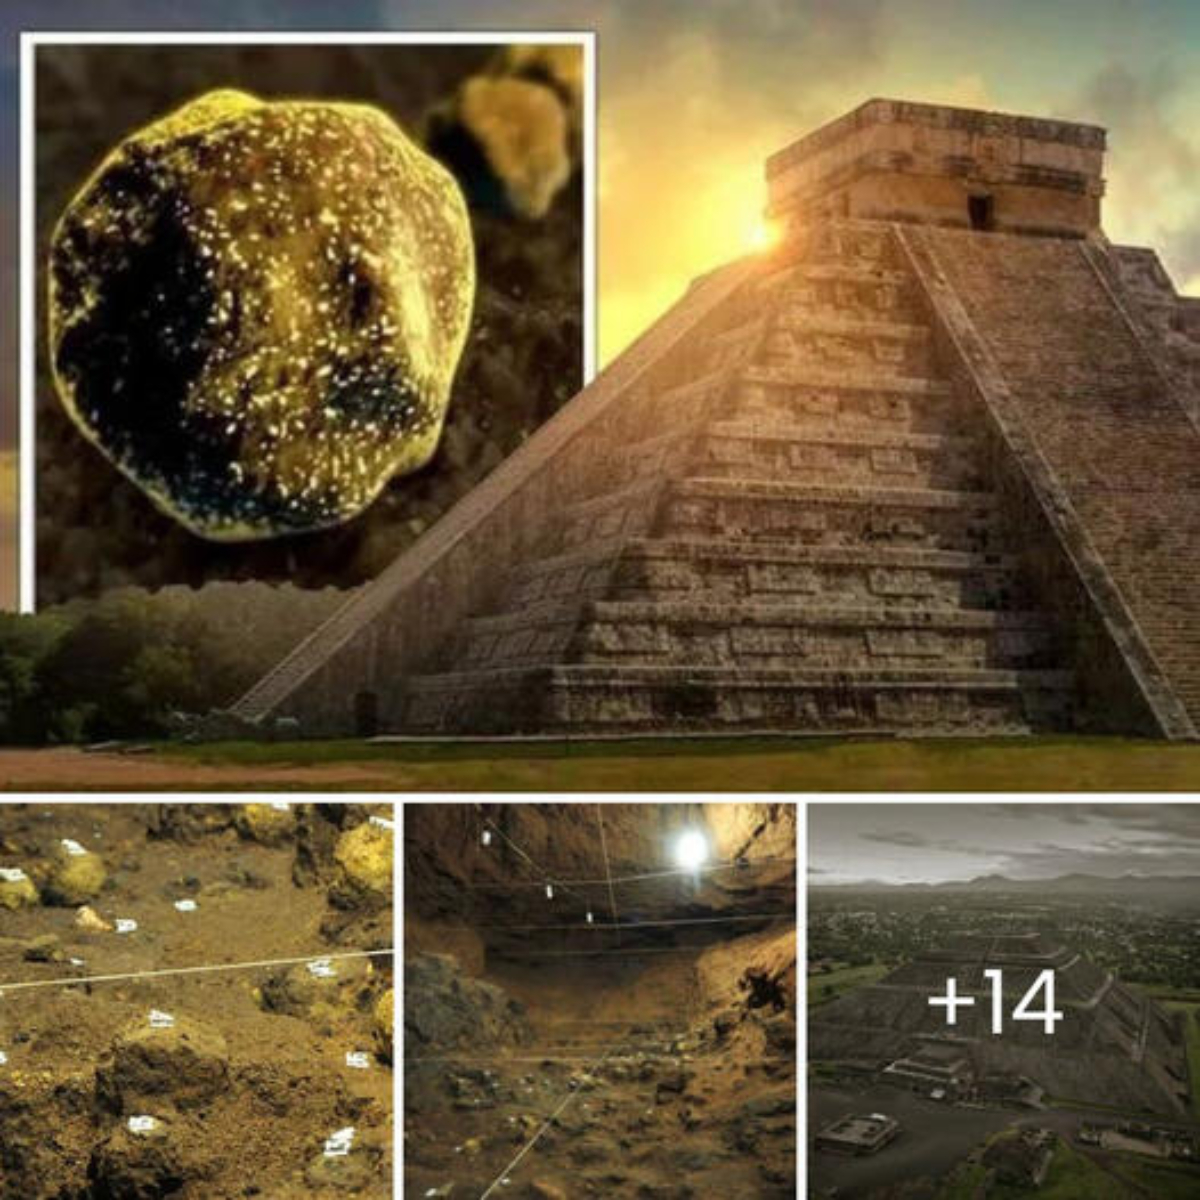 Mystery of Maya ‘Golden Orbs’ Unearthed Beneath Temple of Feathered Serpent in Mexico